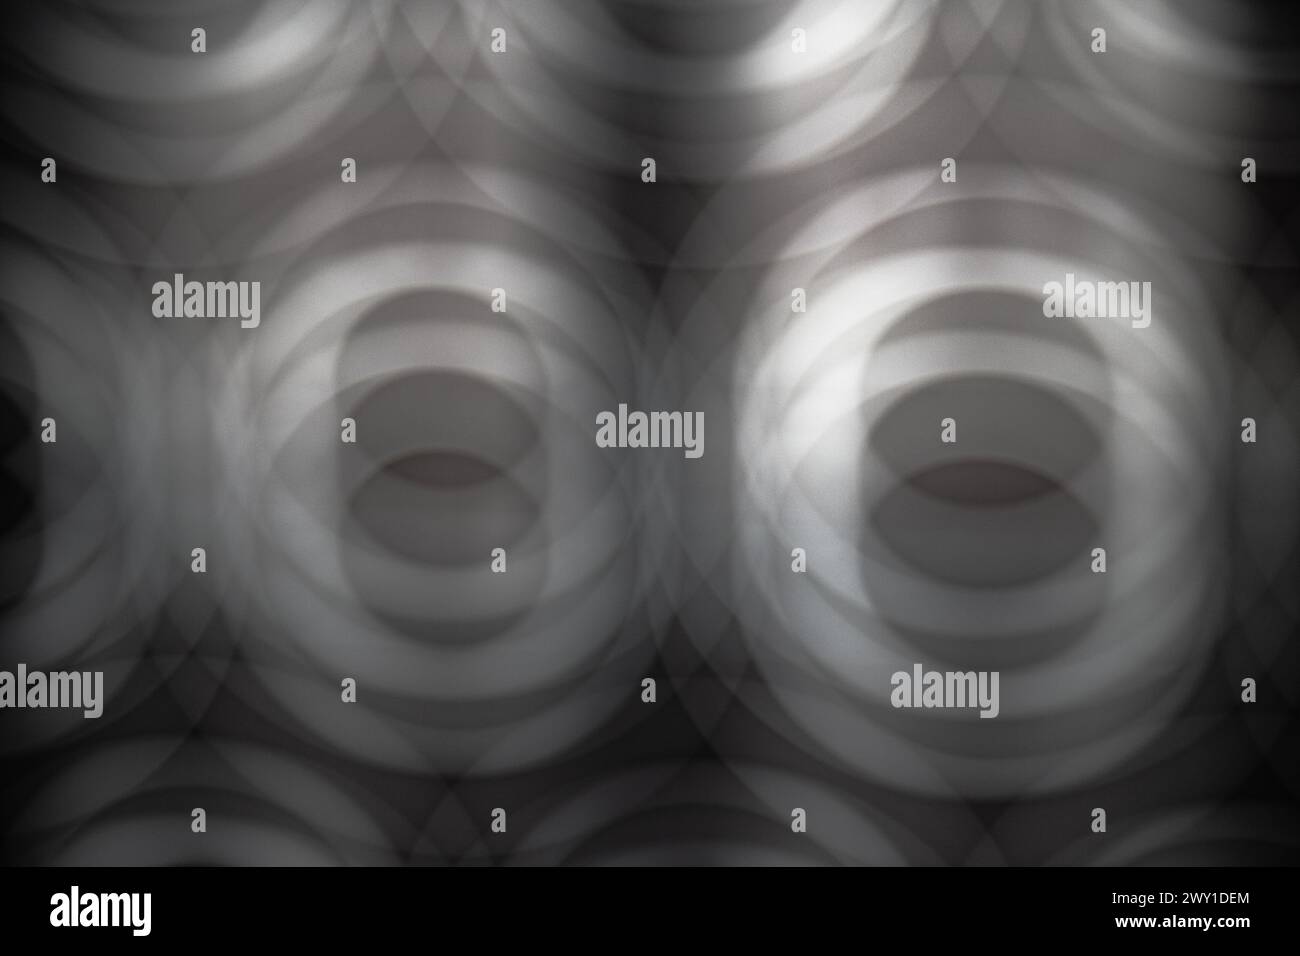 Abstract image in gray tones of multiple blurred circles creating the sensation of depth. Wallpaper, patterns, backgrounds. Stock Photo